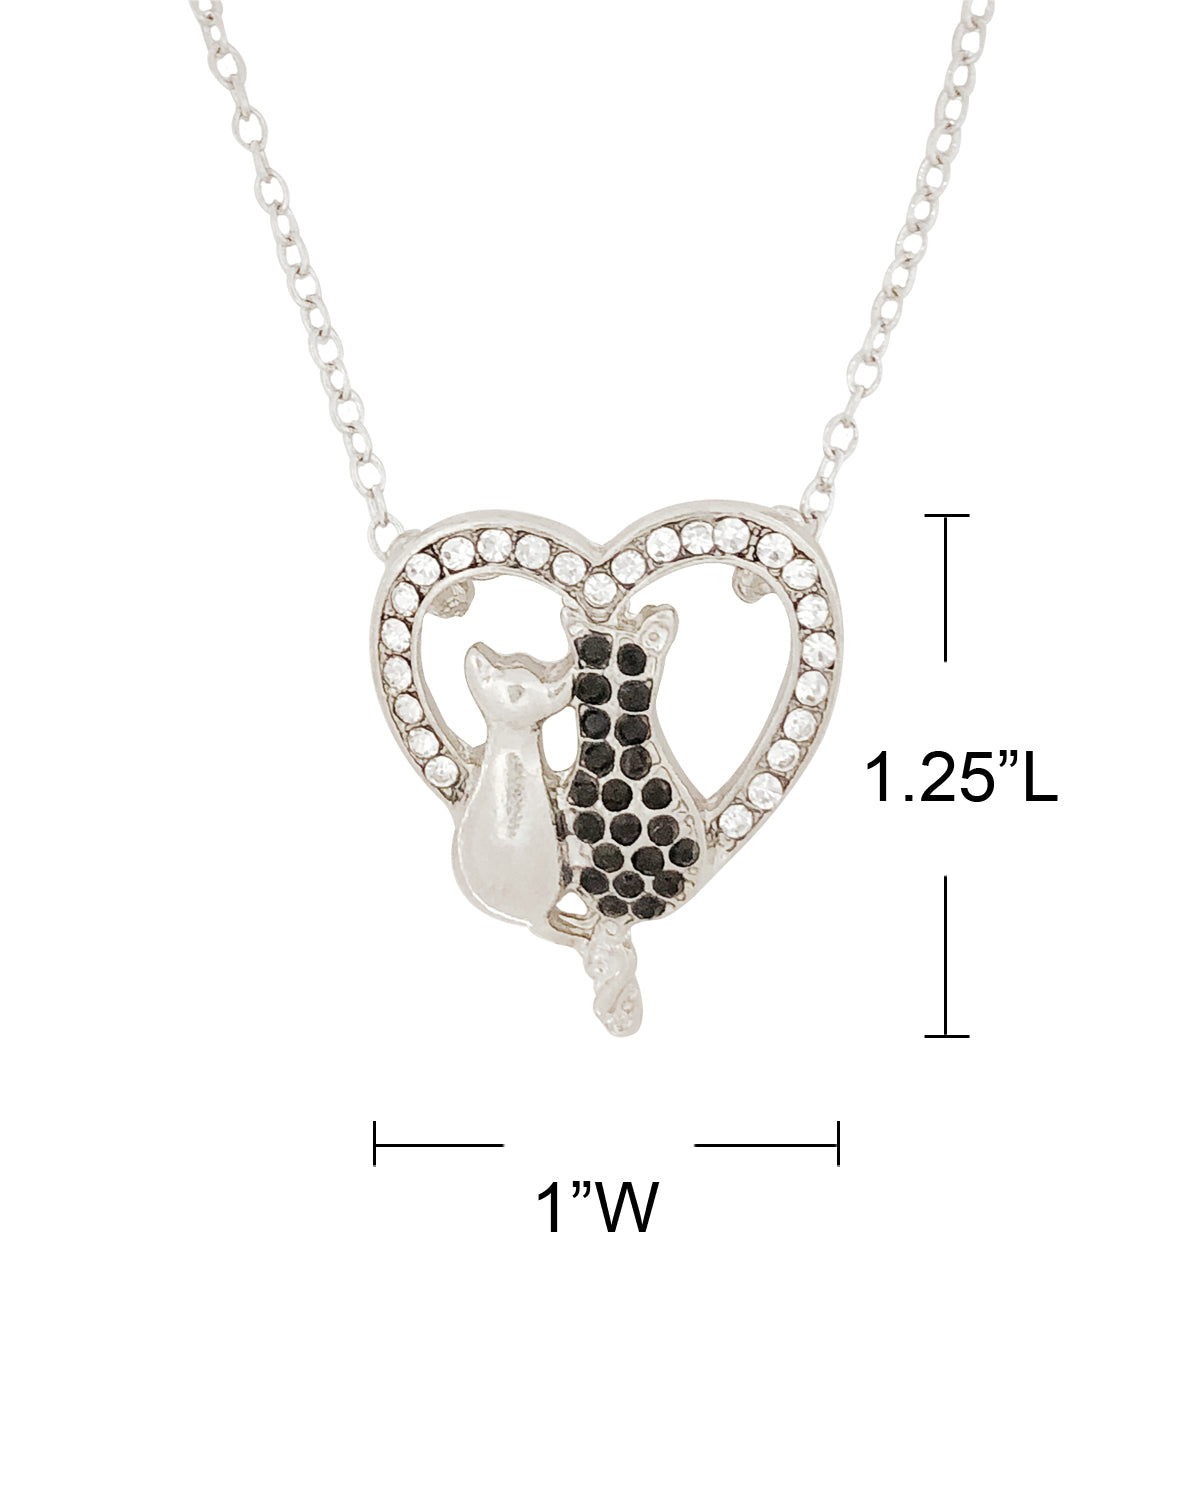 Wrapables Black and White Cat Lovers Heart Pendant Necklace